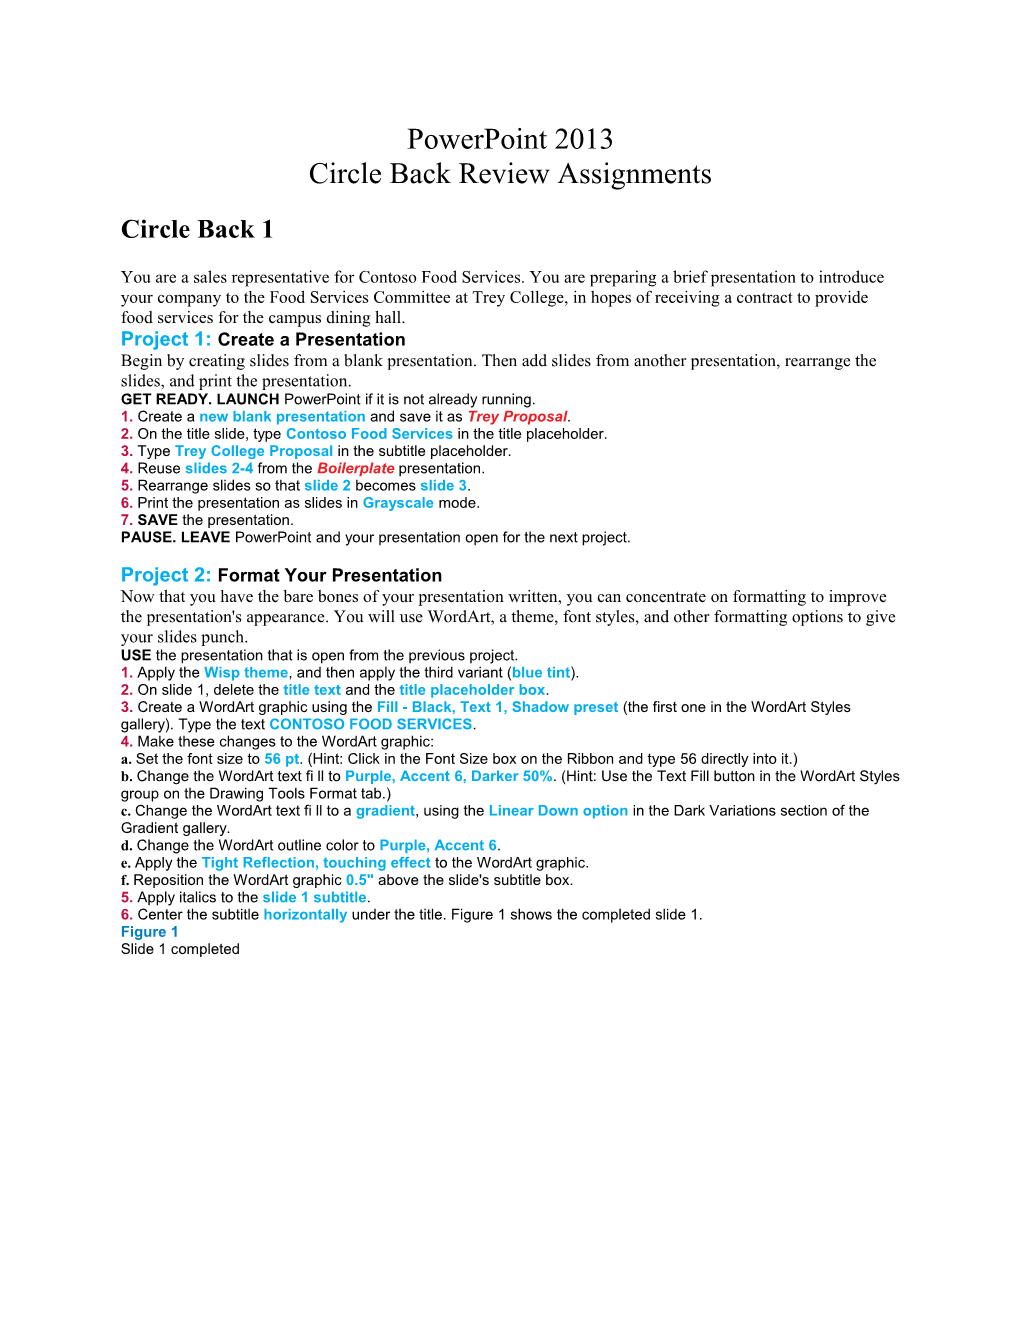 Circle Back Review Assignments